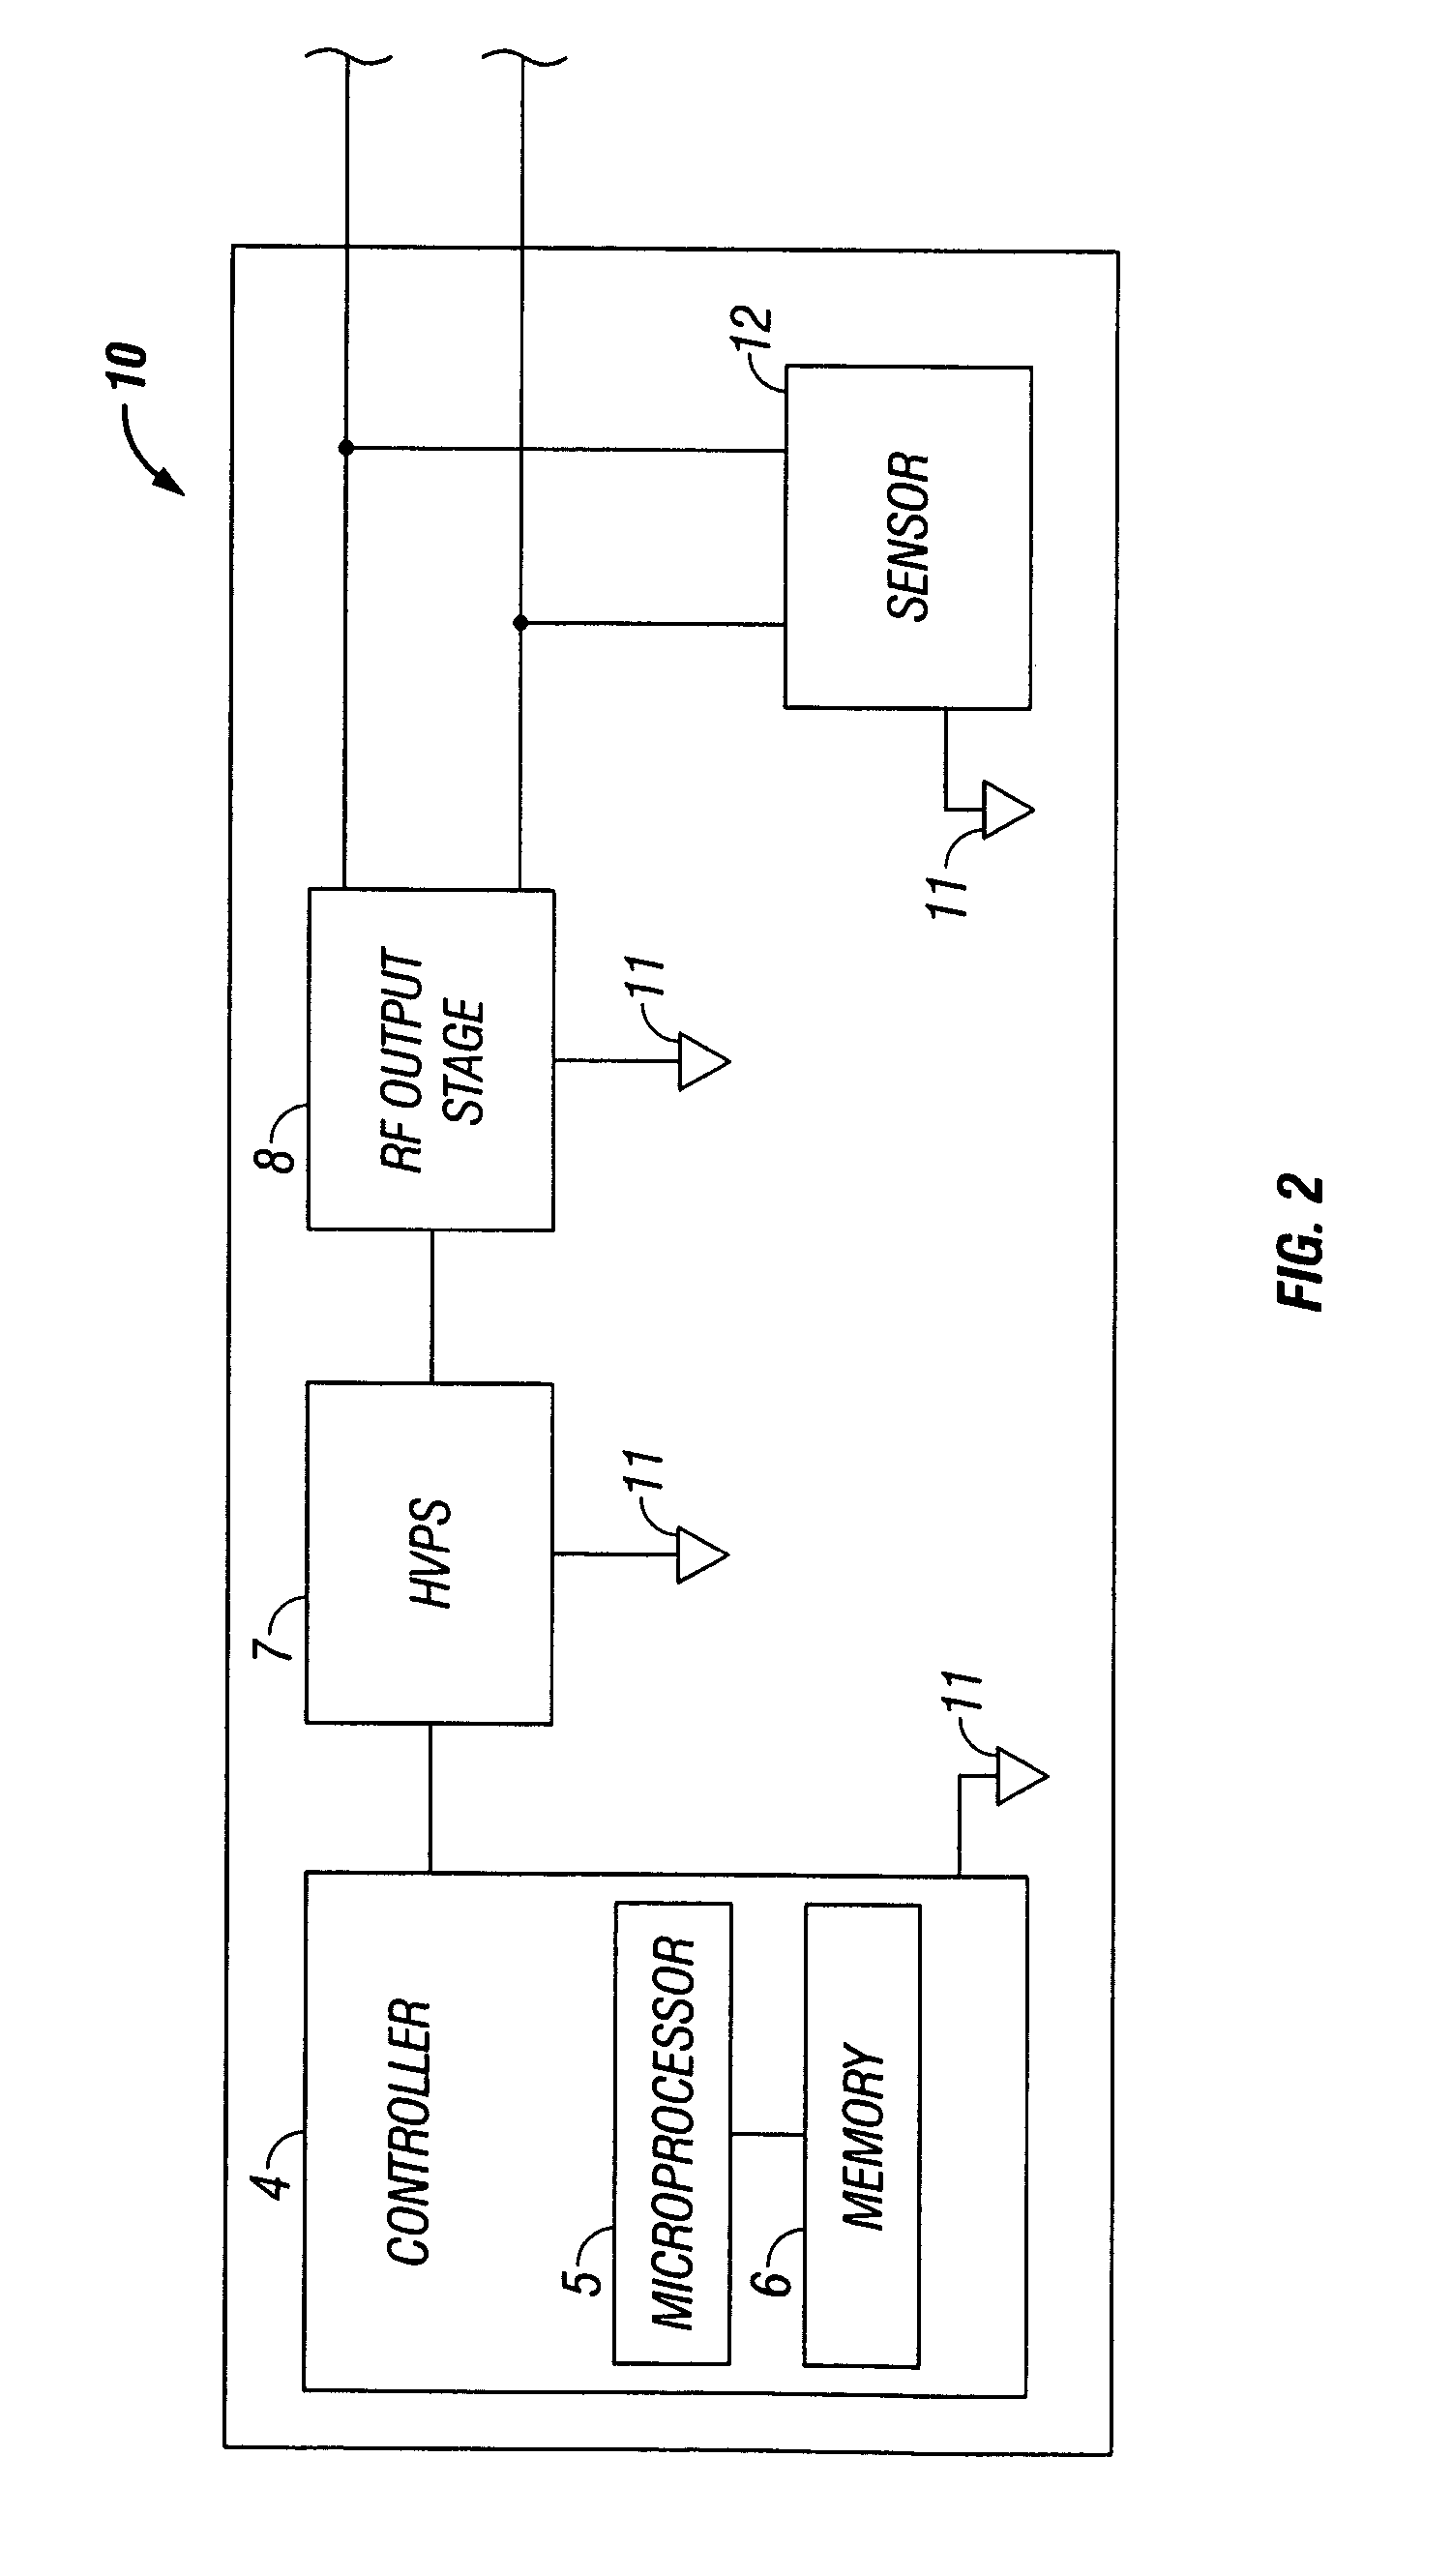 System and method for reducing leakage current in an electrosurgical generator